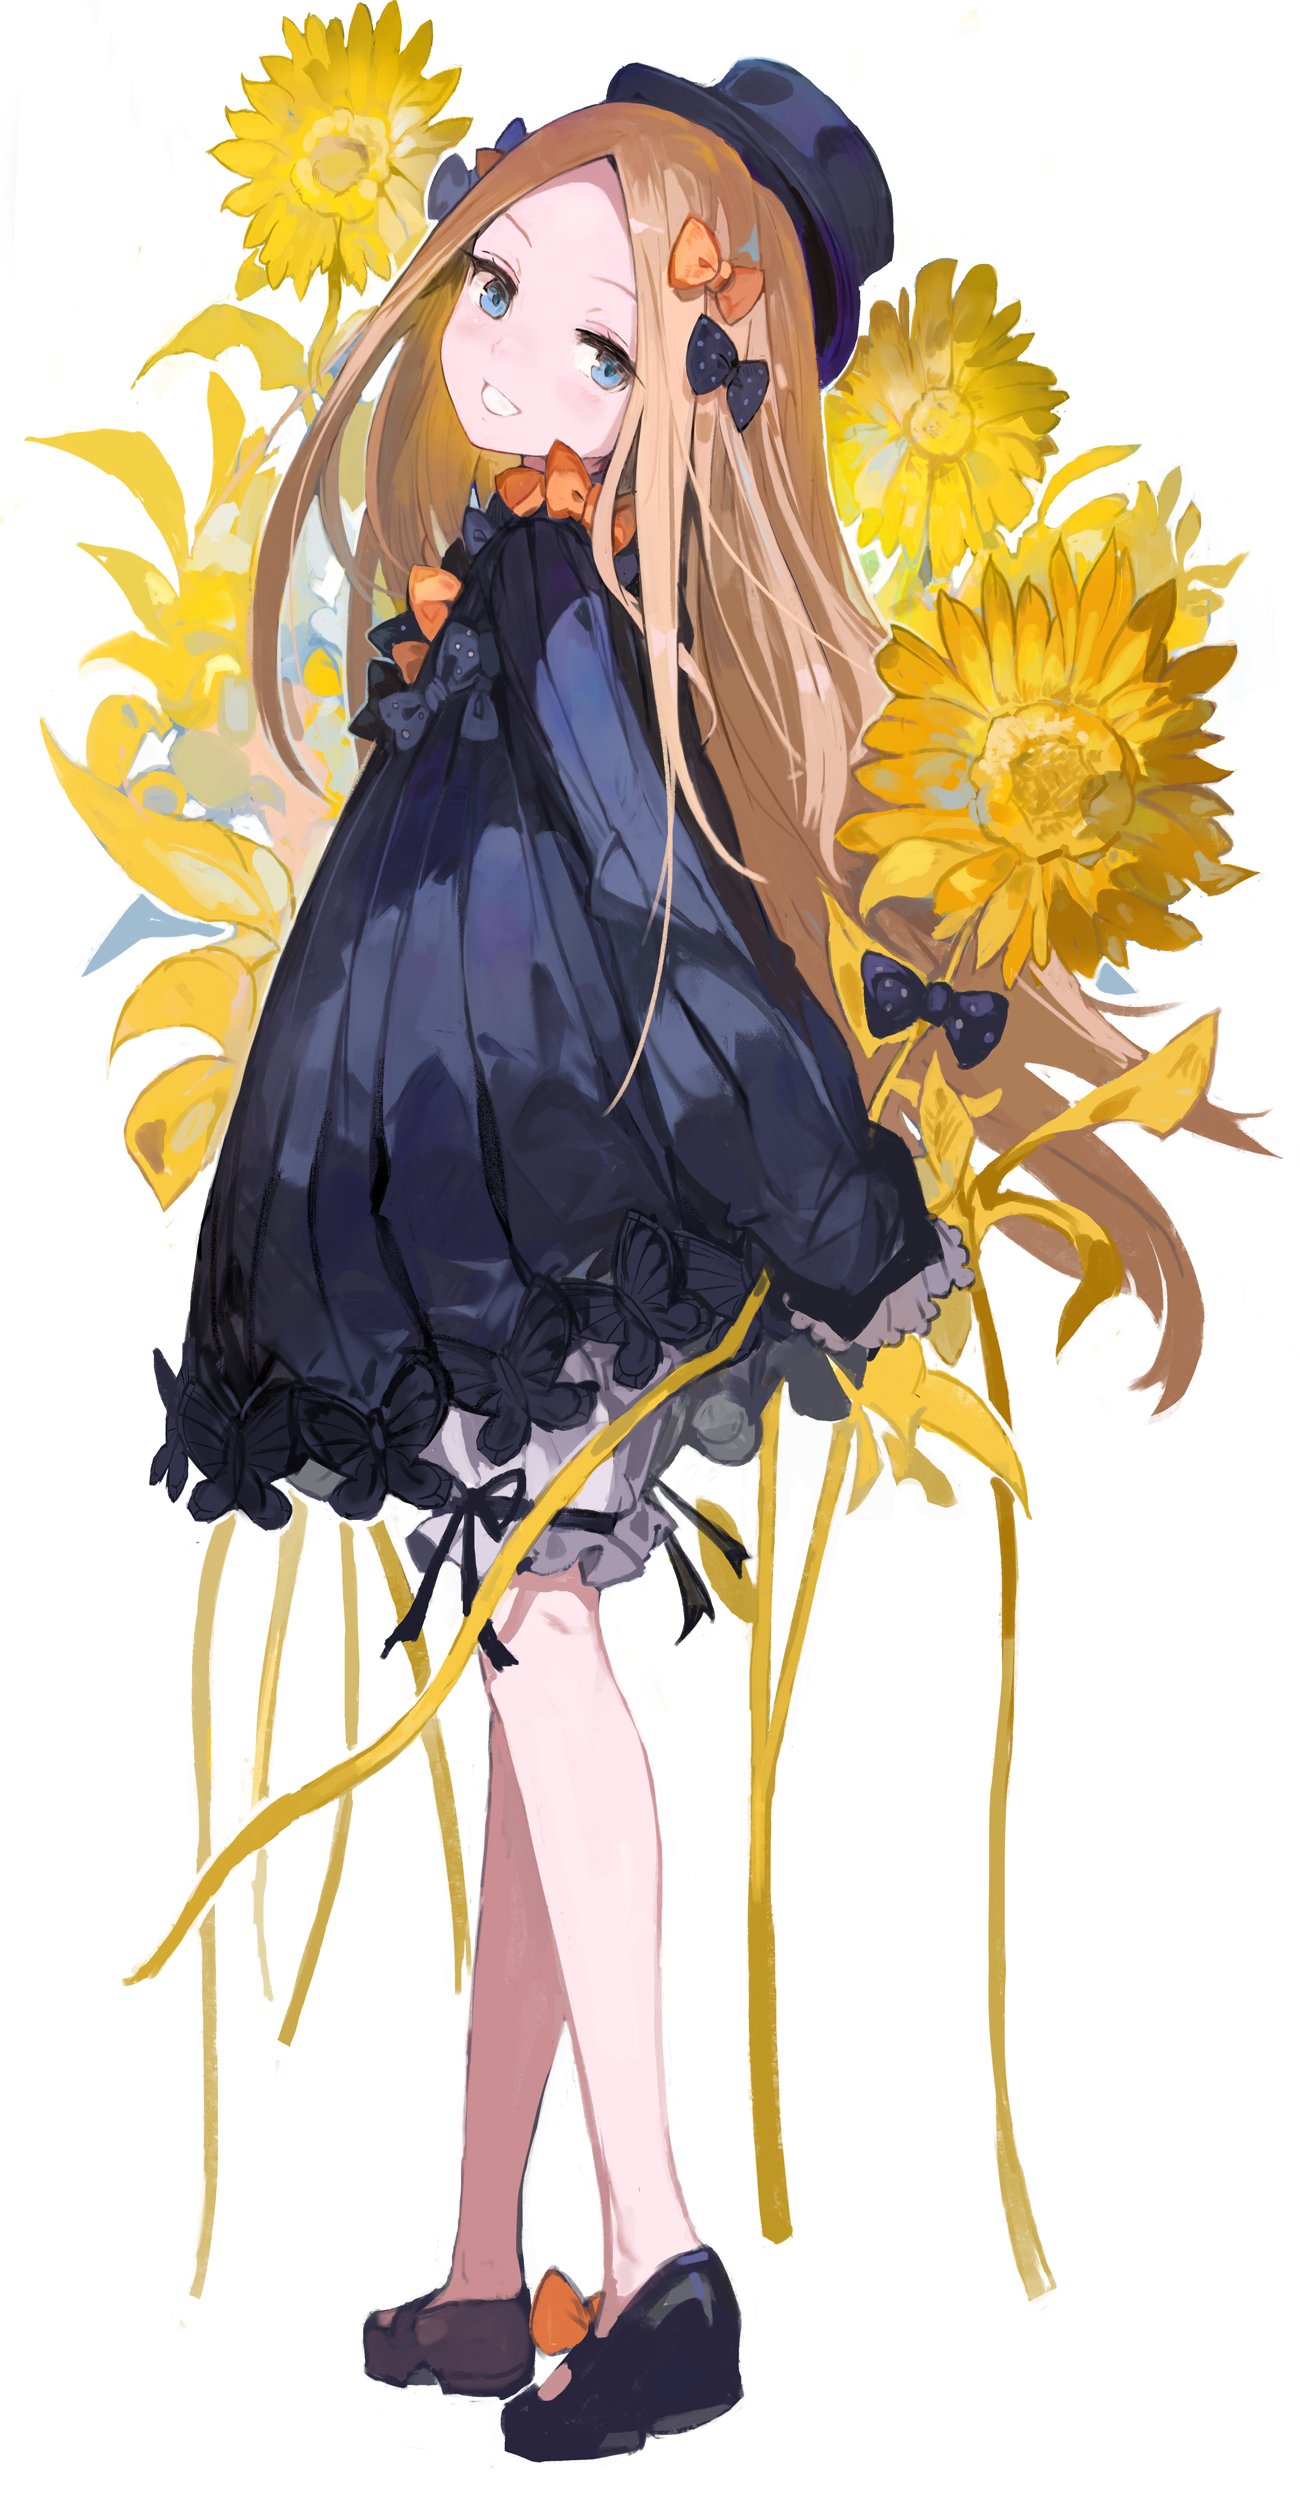 1girl abigail_williams_(fate/grand_order) absurdres alchemaniac black_bow black_dress black_footwear black_headwear blonde_hair blue_eyes blush bow dress fate/grand_order fate_(series) flower from_side full_body hat head_tilt highres long_hair long_sleeves looking_at_viewer looking_to_the_side orange_bow petticoat polka_dot polka_dot_bow shoe_bow shoes smile solo standing sunflower top_hat very_long_hair white_background yellow_flower